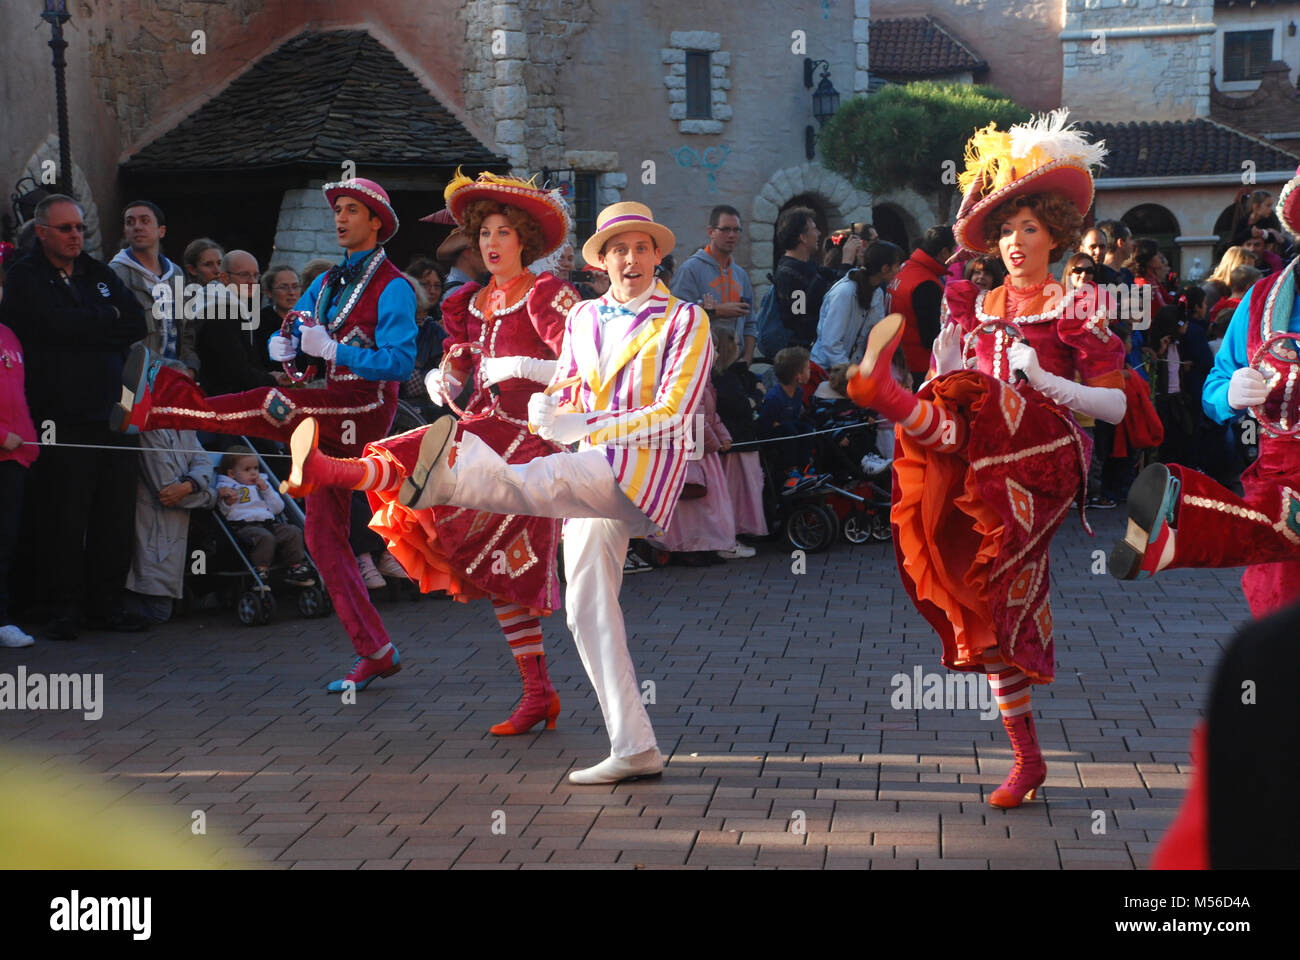 Actors in costumes dancing in the parade in Euro Disney, Paris, France Stock Photo